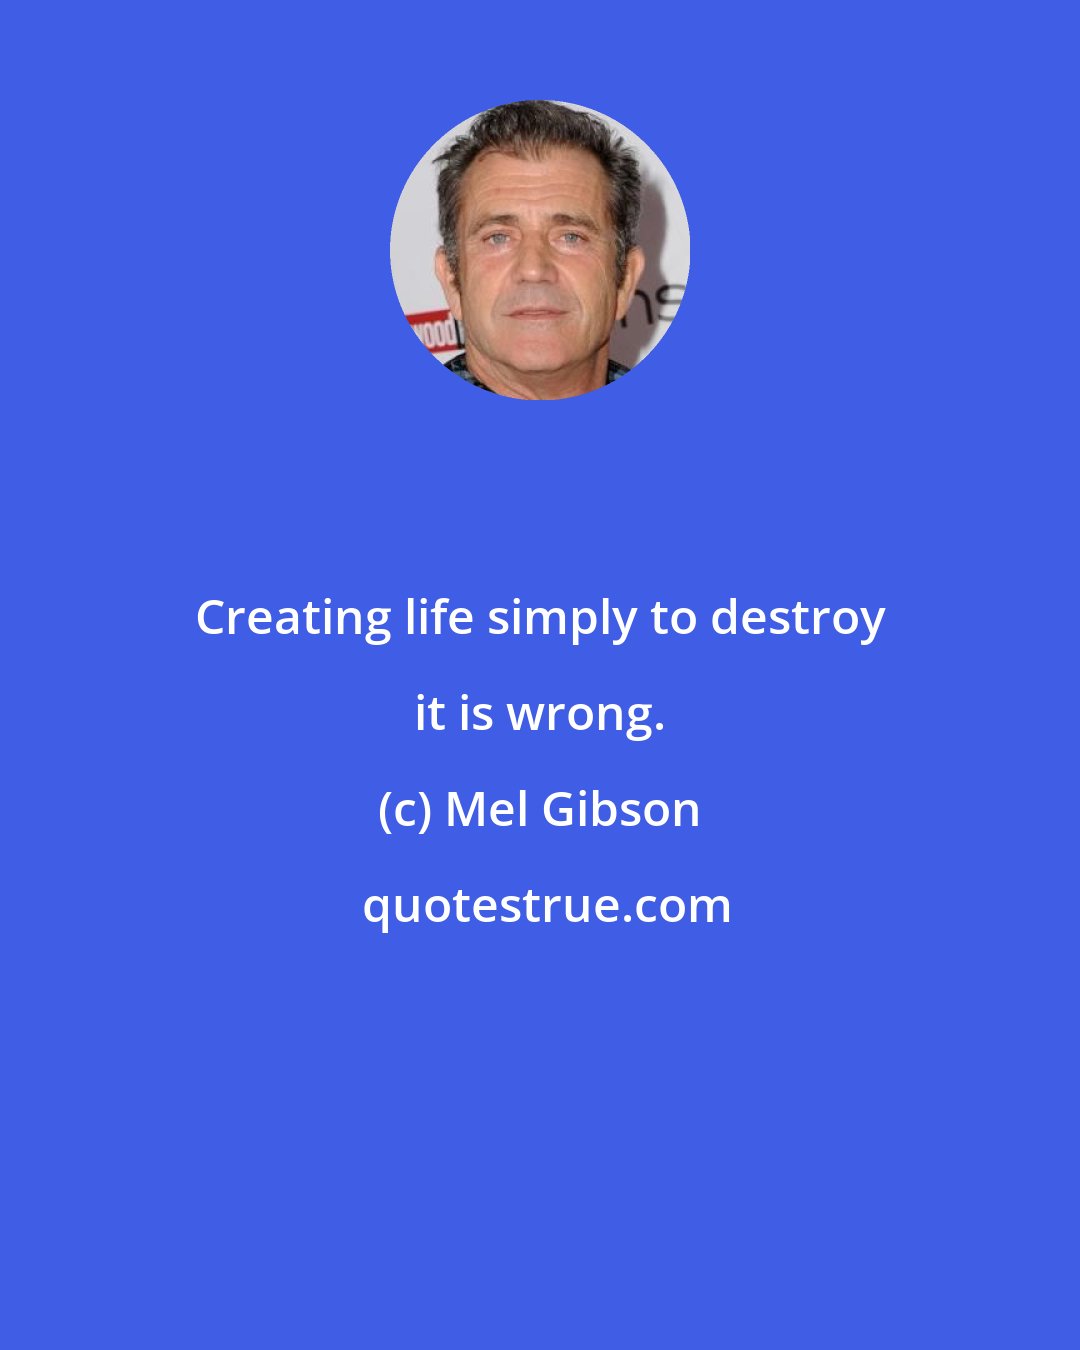 Mel Gibson: Creating life simply to destroy it is wrong.